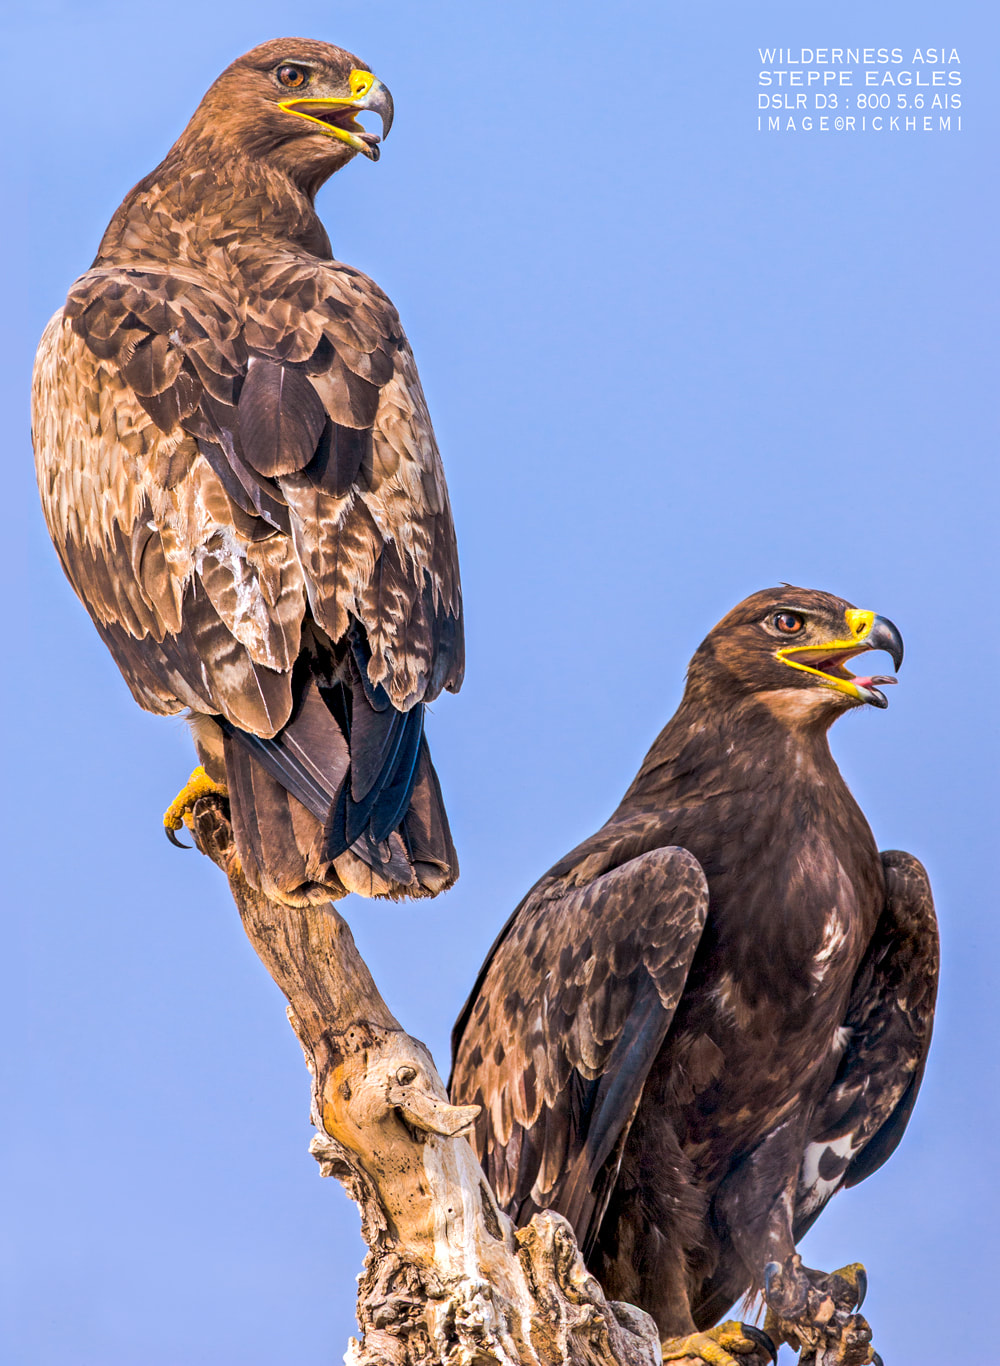 Asia solo overland travel, wildlife photography, steppe eagles, DSLR photo-gear, image by Rick Hemi